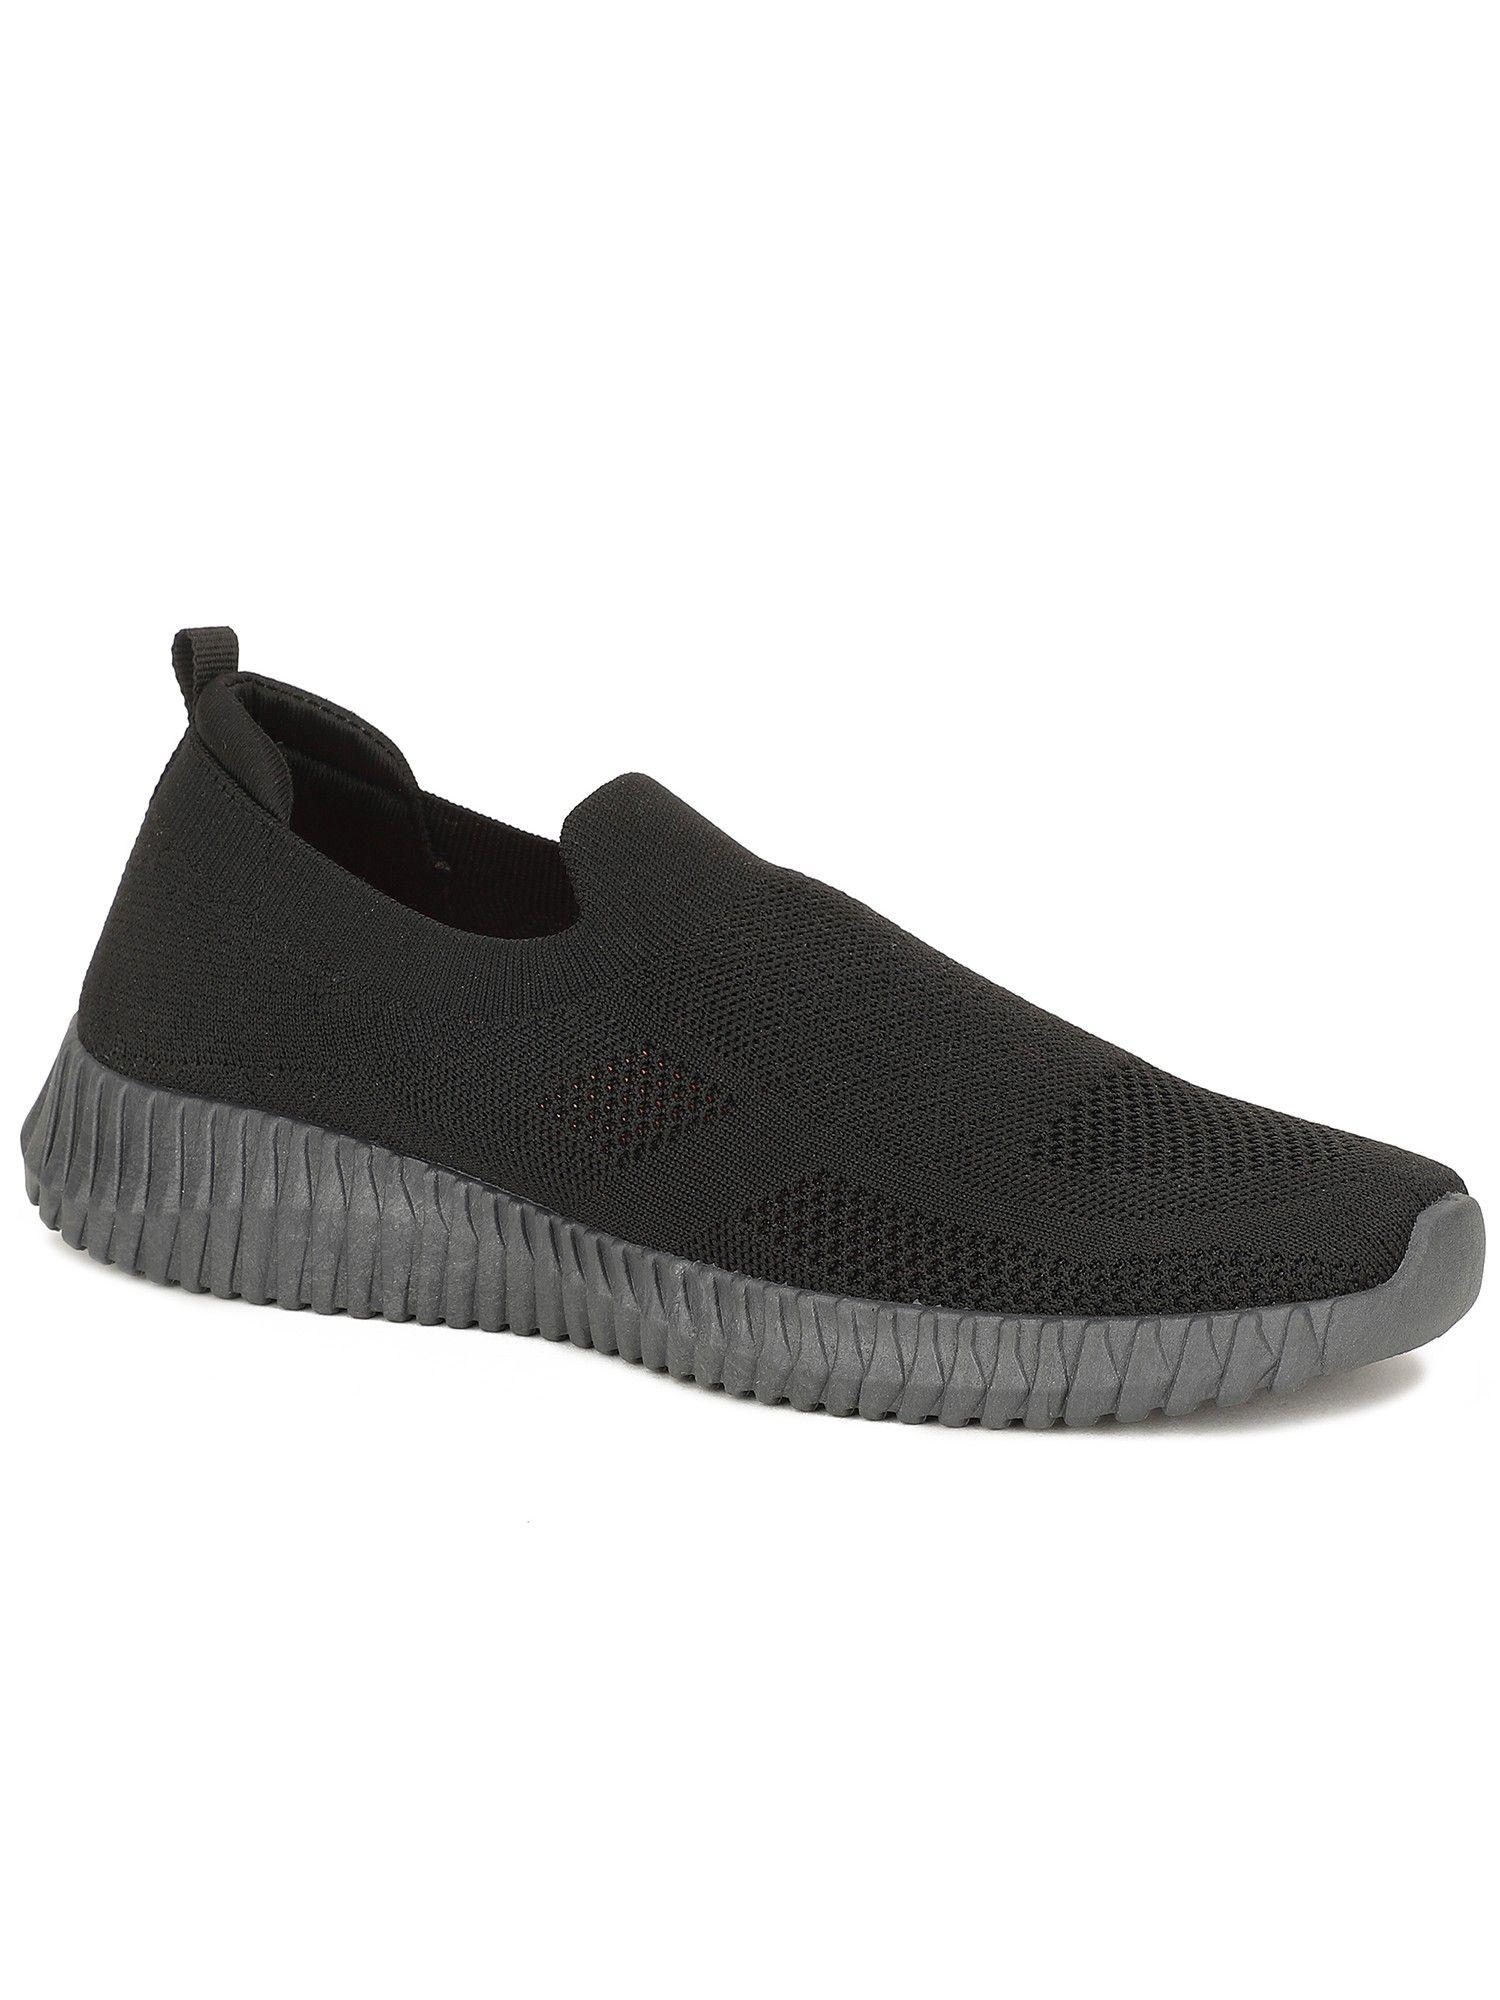 woven black casual shoes